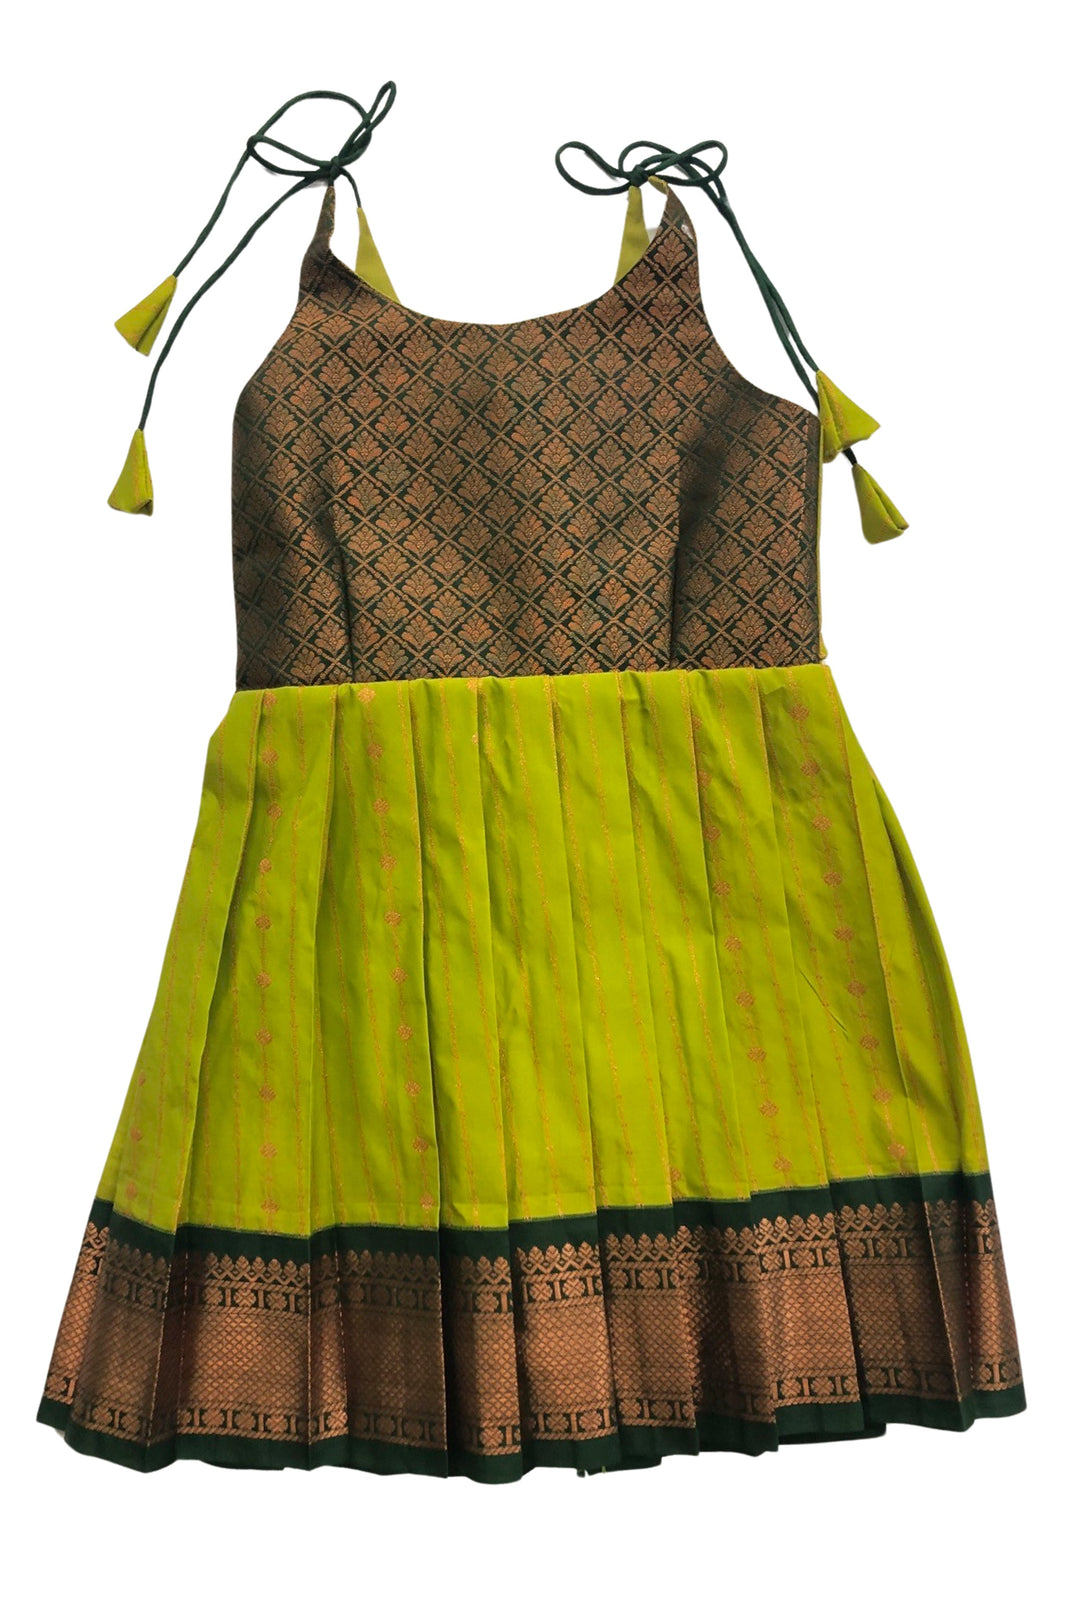 The Nesavu Tie Up Frock Vibrant Lime and Cocoa Silk Tie-Up Frock – Exotic Fusion Fashion Nesavu 18 (2Y) / Green / Style 3 T319C-18 Lime & Cocoa Silk Frock | Trendy Geometric Print Tie-Up Dress | The Nesavu